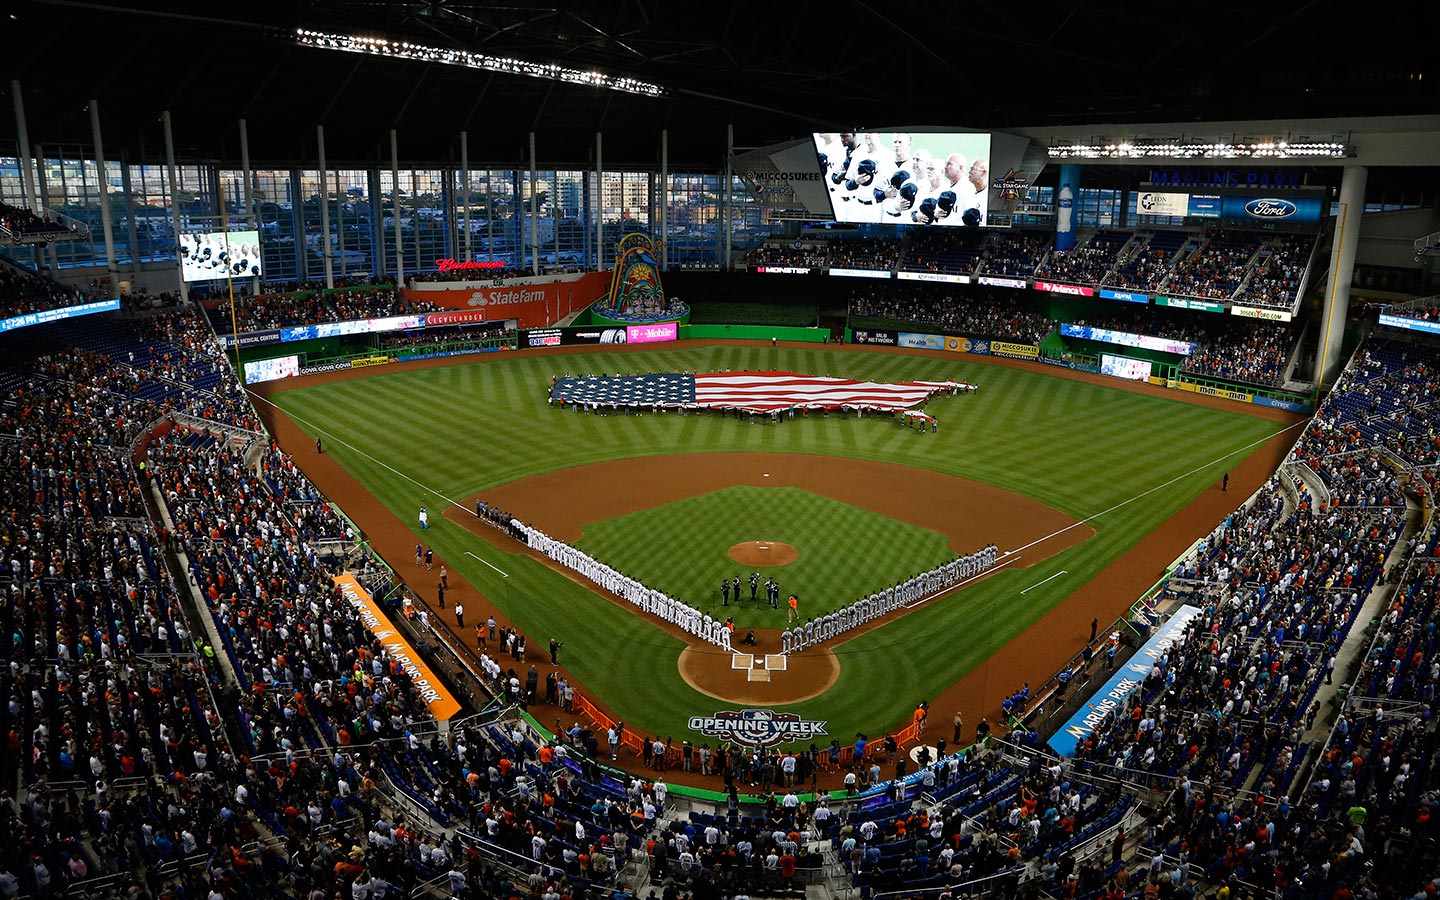 MLB All-Star Game 2017 Guide to Marlins Park